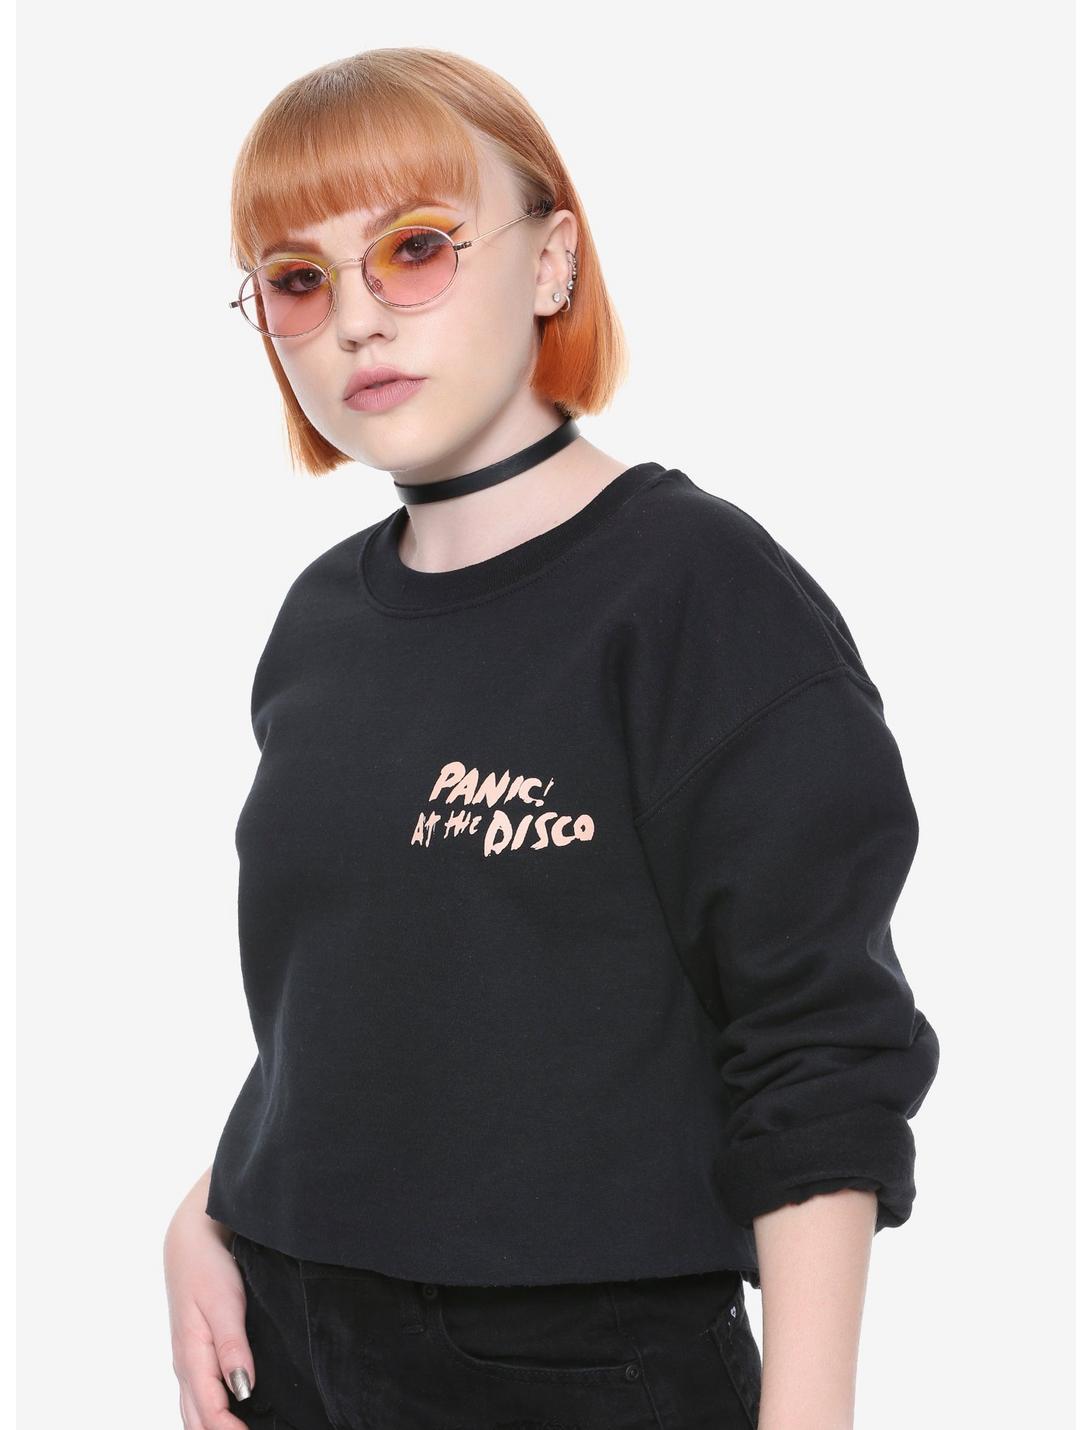 Panic! At The Disco Pray For The Wicked Crop Sweatshirt, BLACK, hi-res